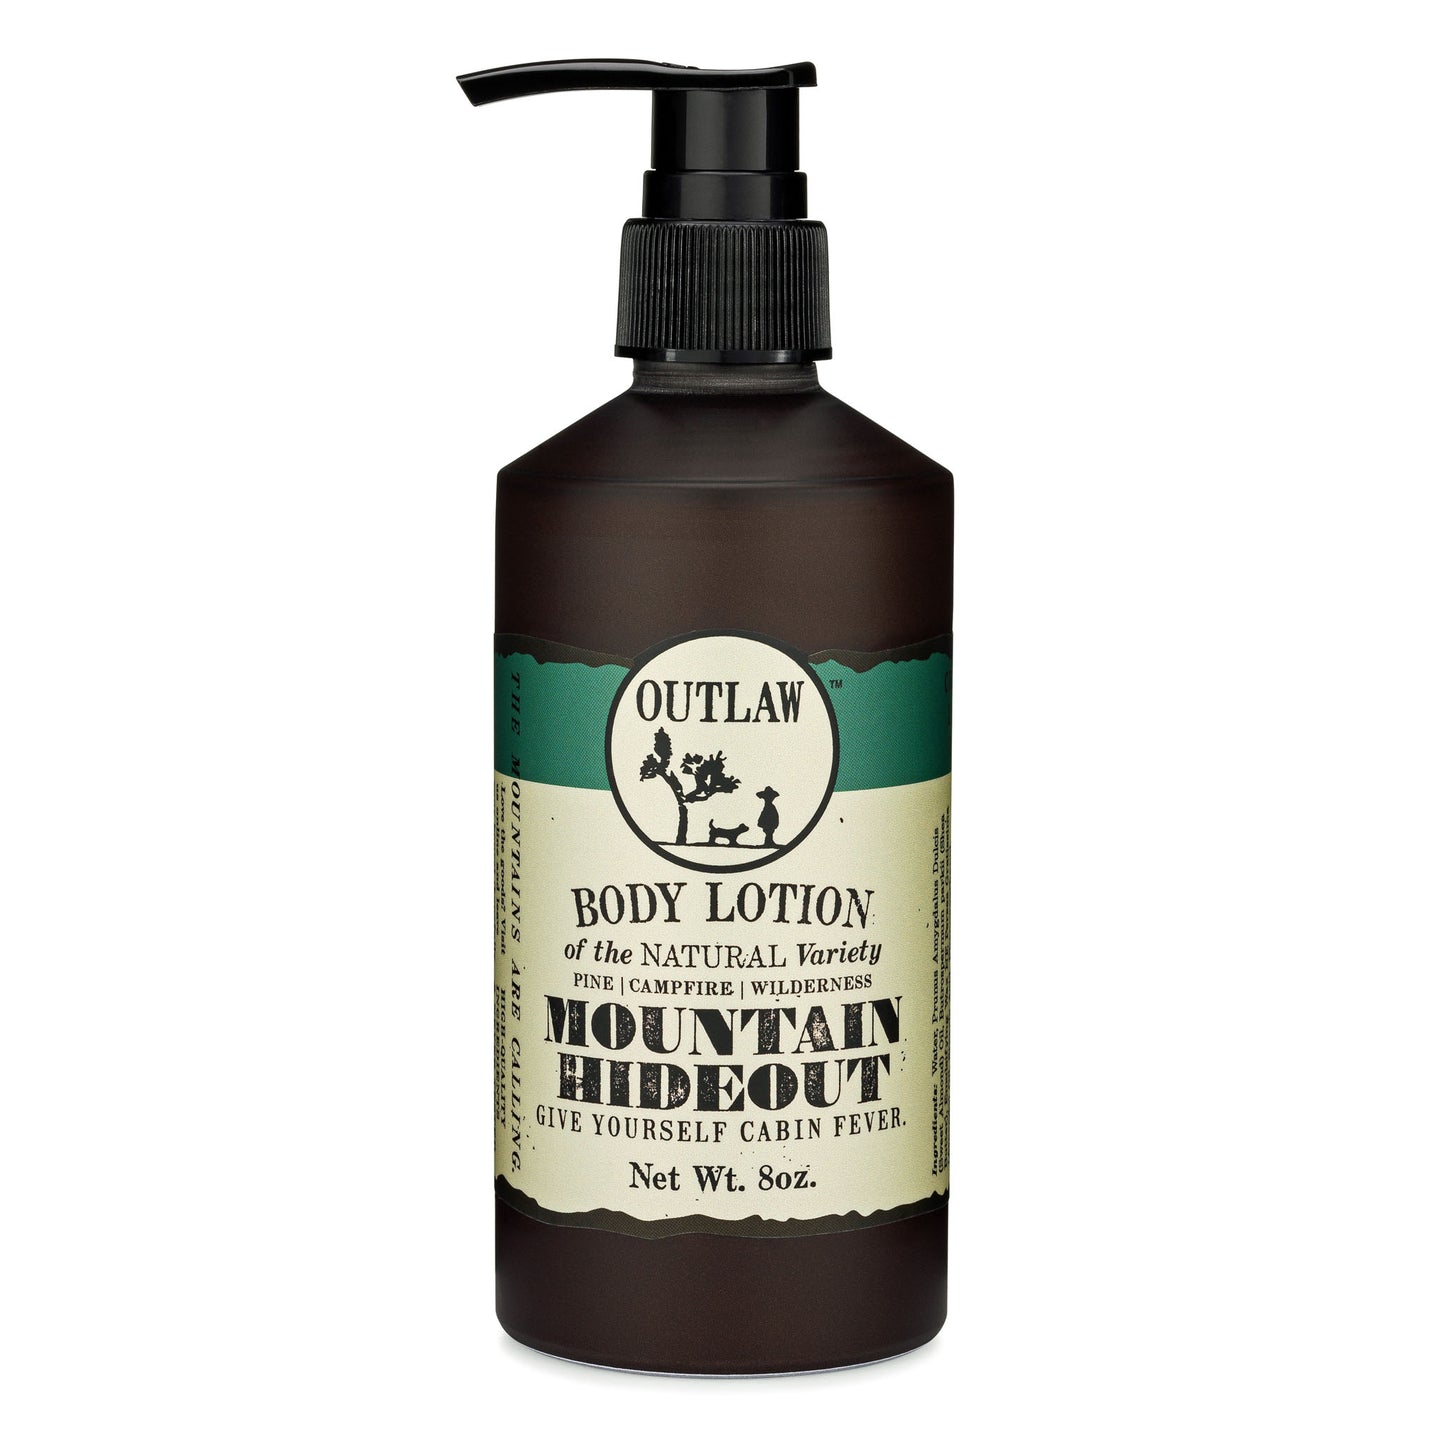 Outlaw Mountain Hideout pine and campfire scented natural body lotion